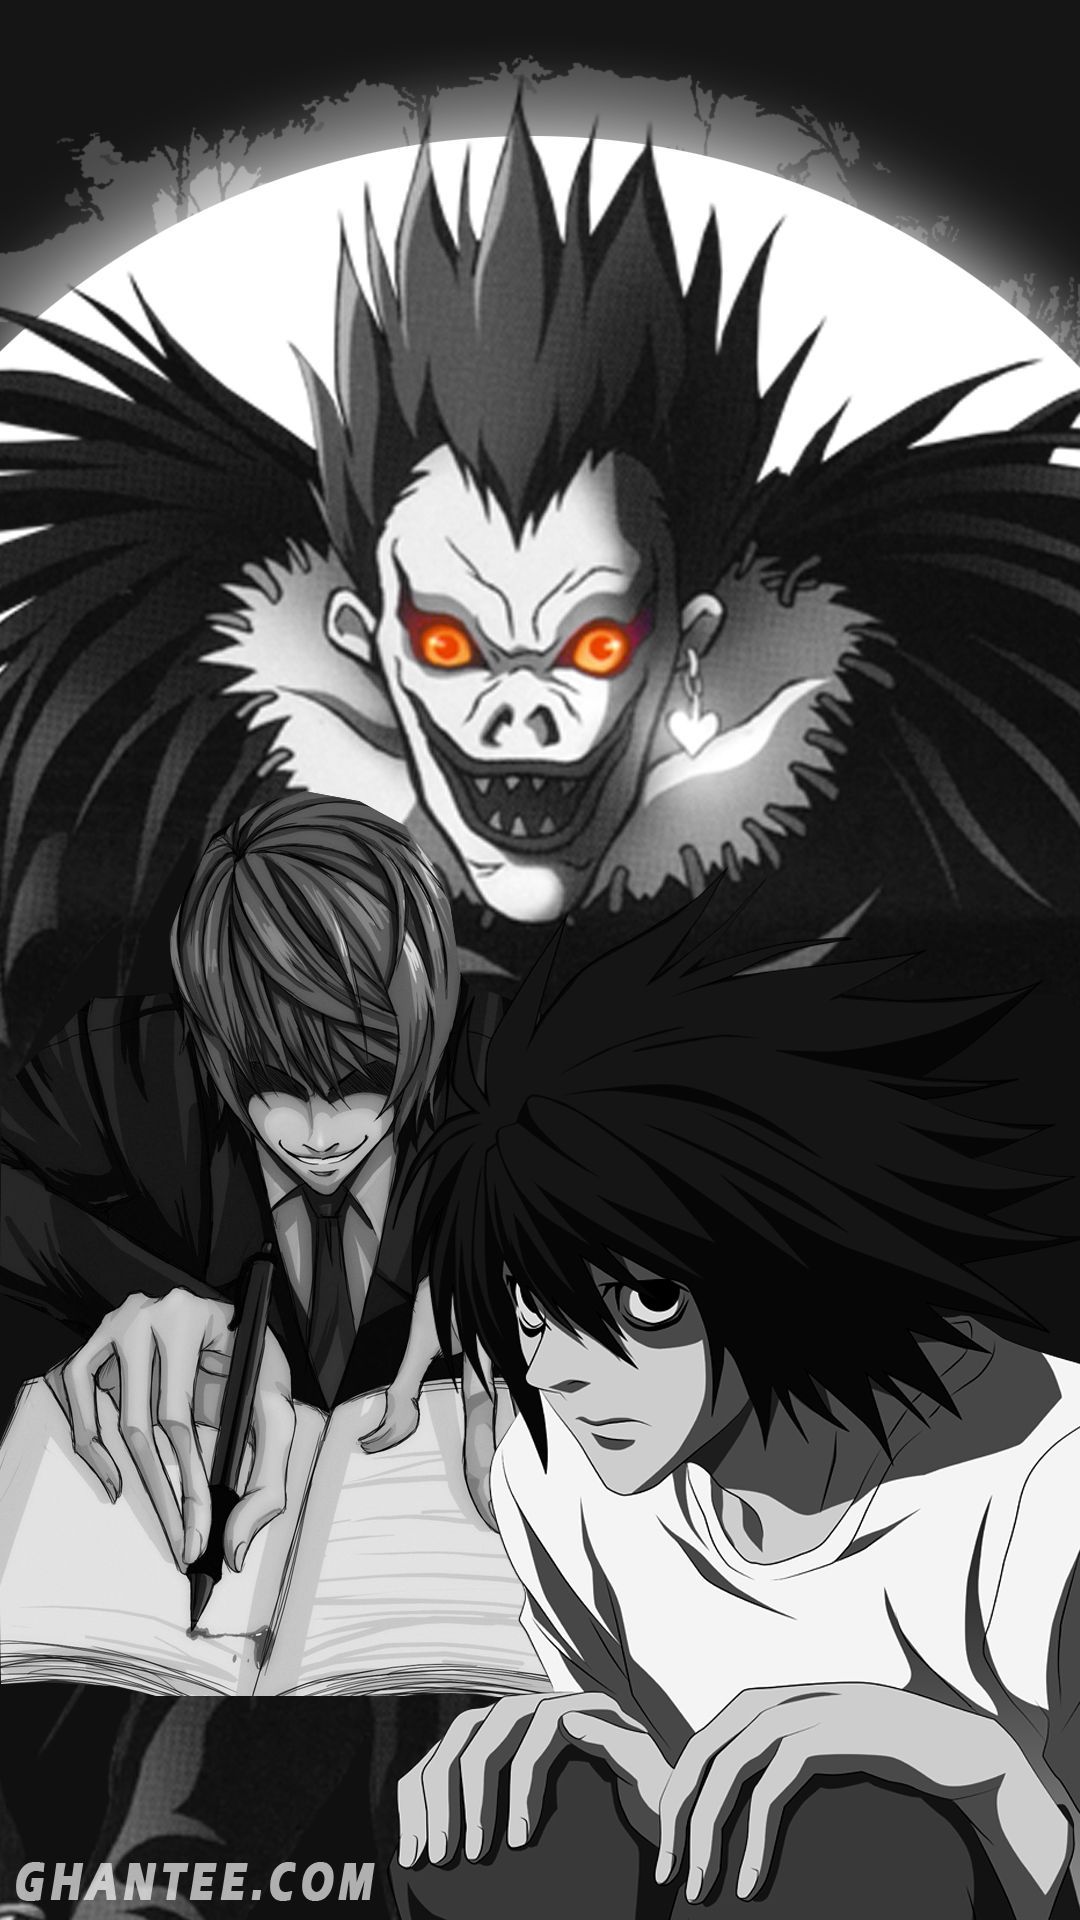 Death Note Aesthetic Wallpapers - Wallpaper Cave